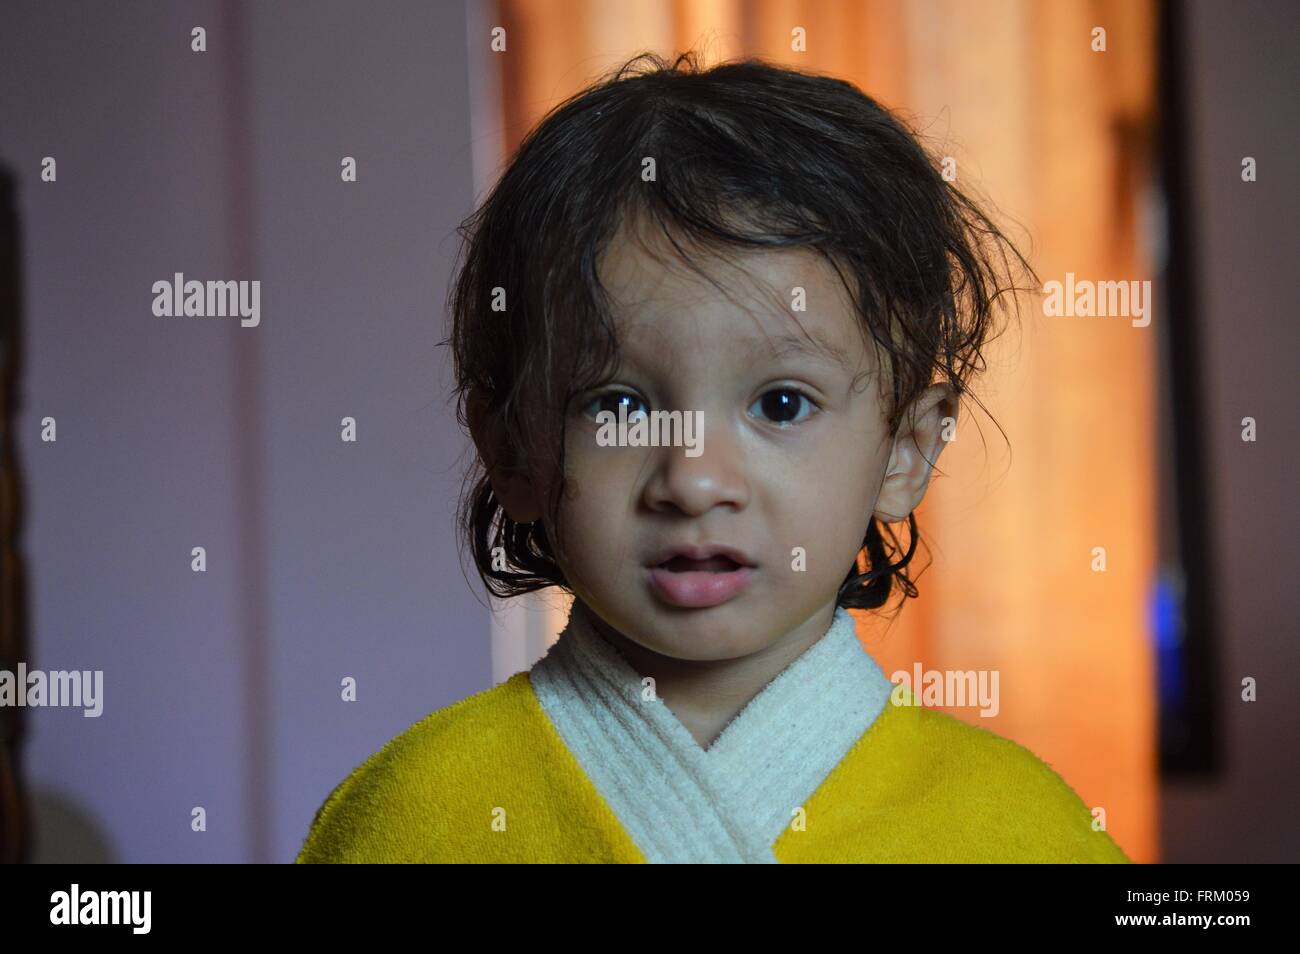 A two year old Indian kid in New Delhi, India Stock Photo